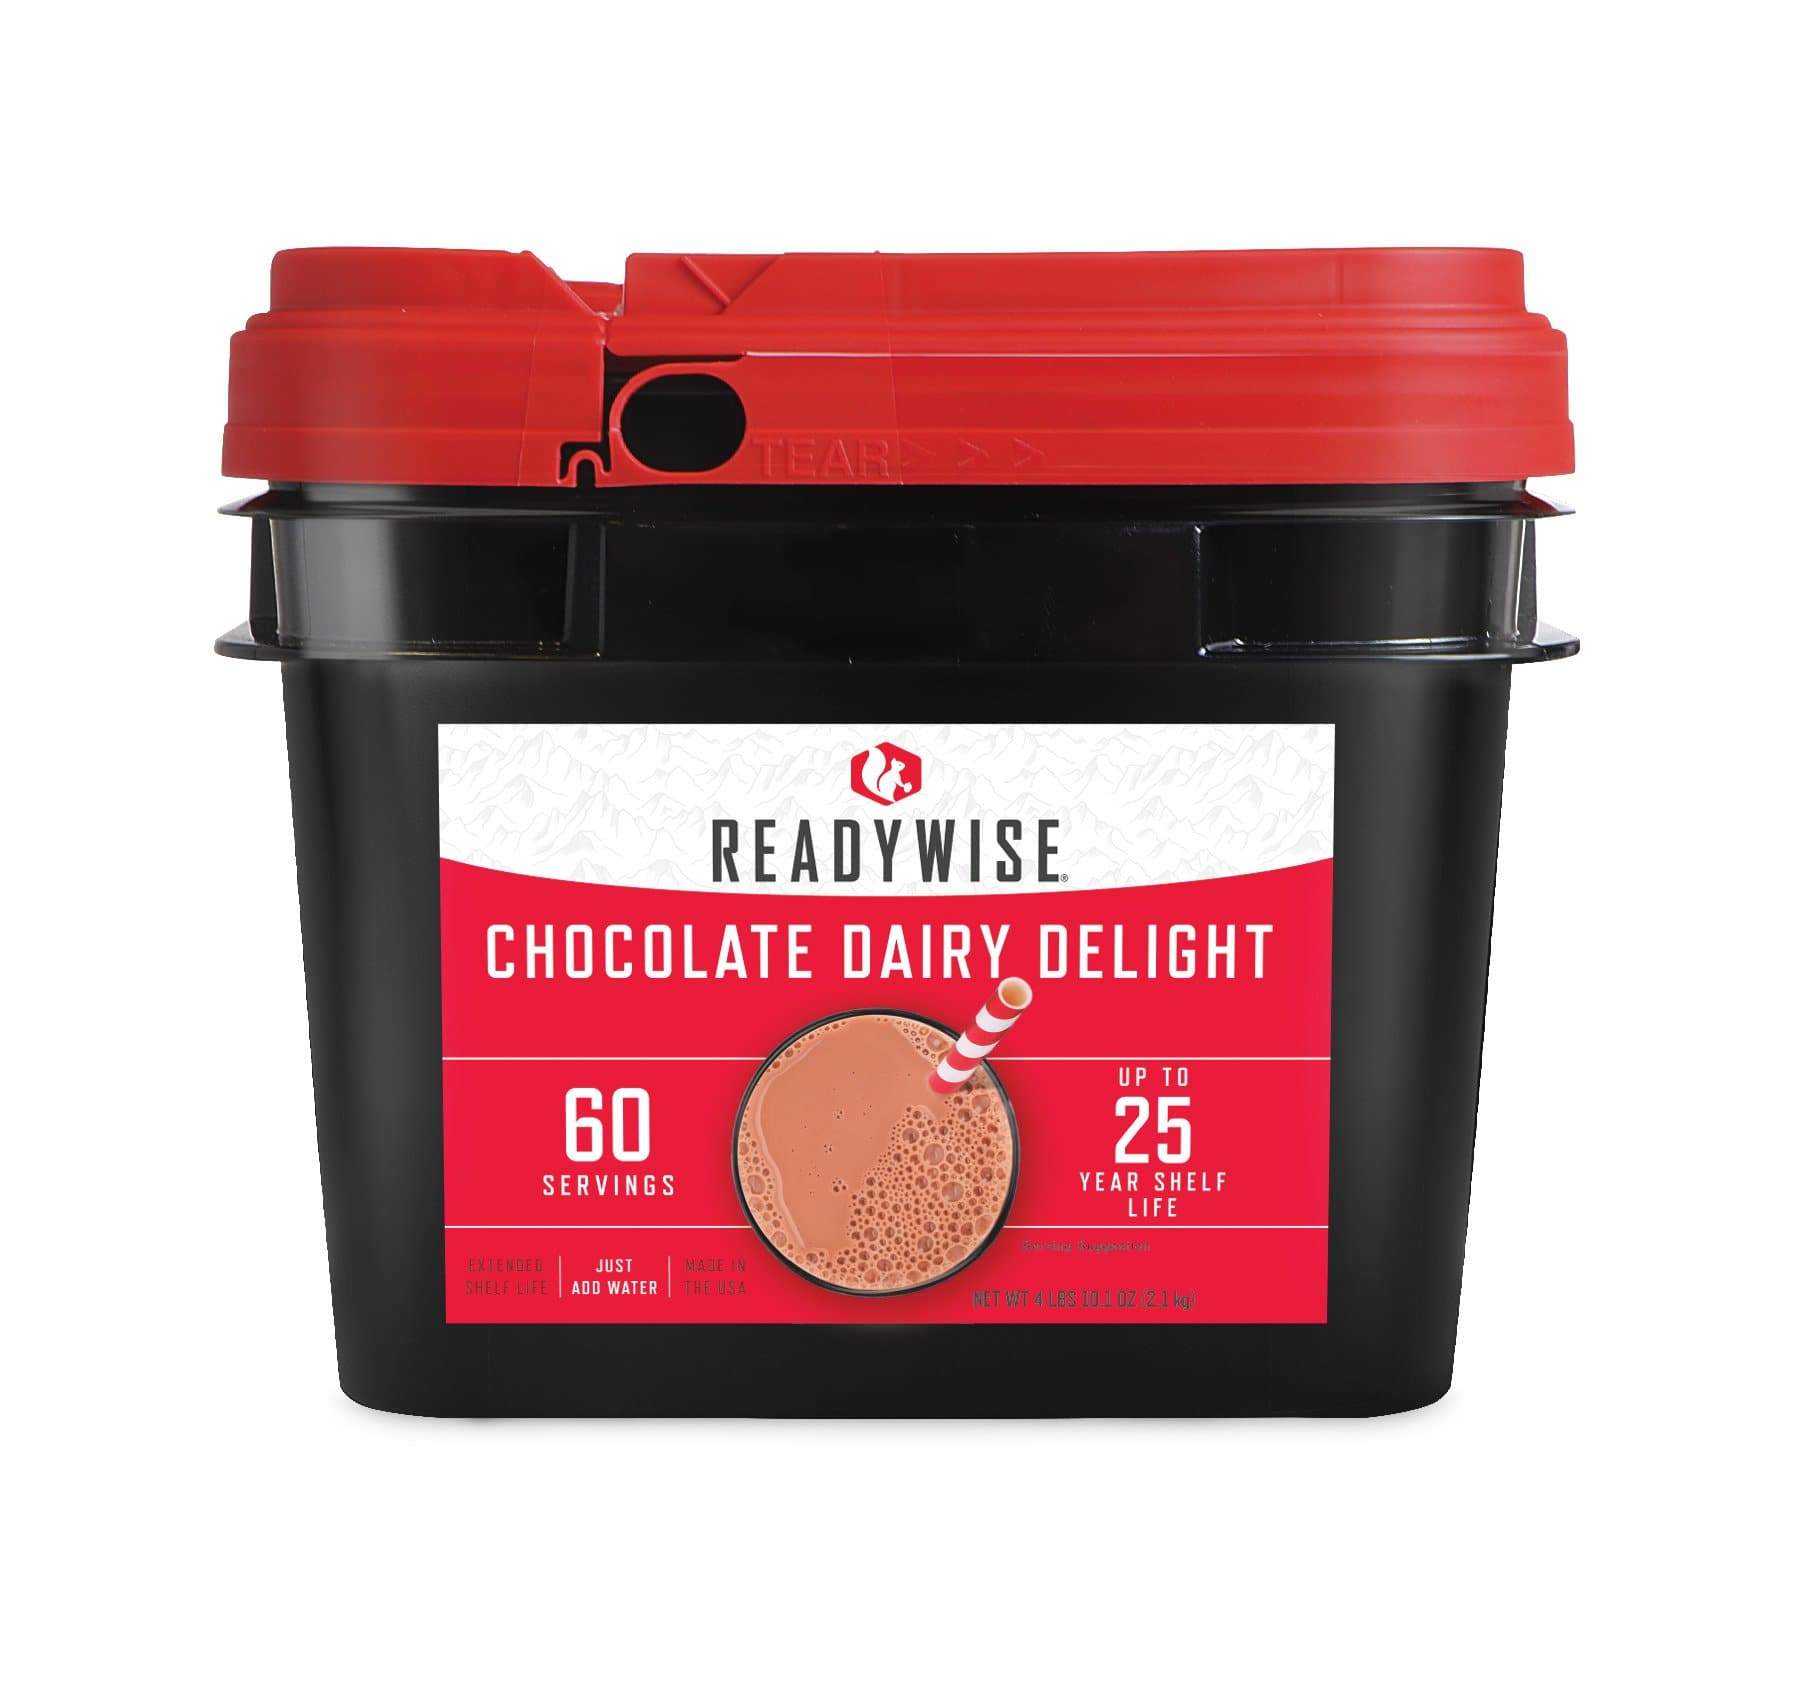 Rednoise ReadyWise (formerly Wise Food Storage) 60 Serving Chocolate Milk Bucket (SHIPS IN 1-2 WEEKS).